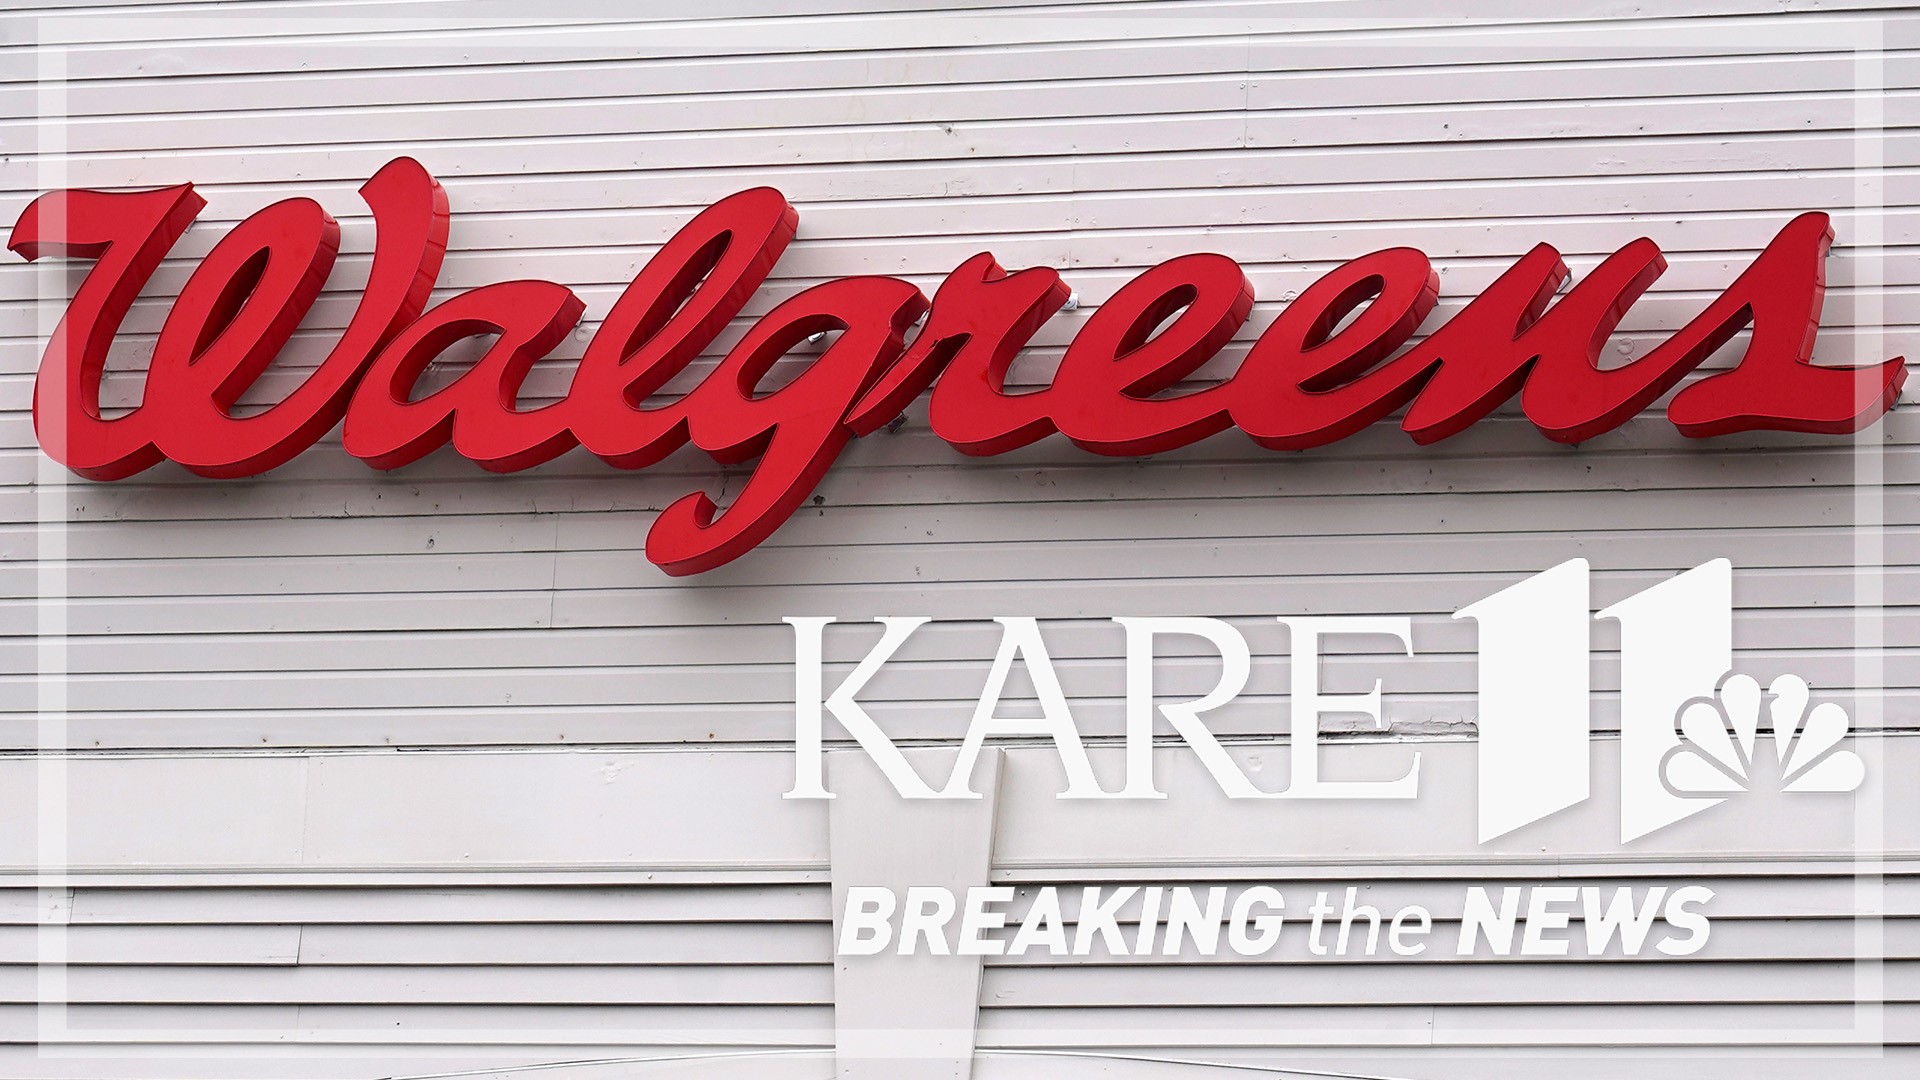 The Walgreens located at the corner of W. Broadway Ave. and N. Lyndale Ave. will close on Wednesday, Feb. 22.